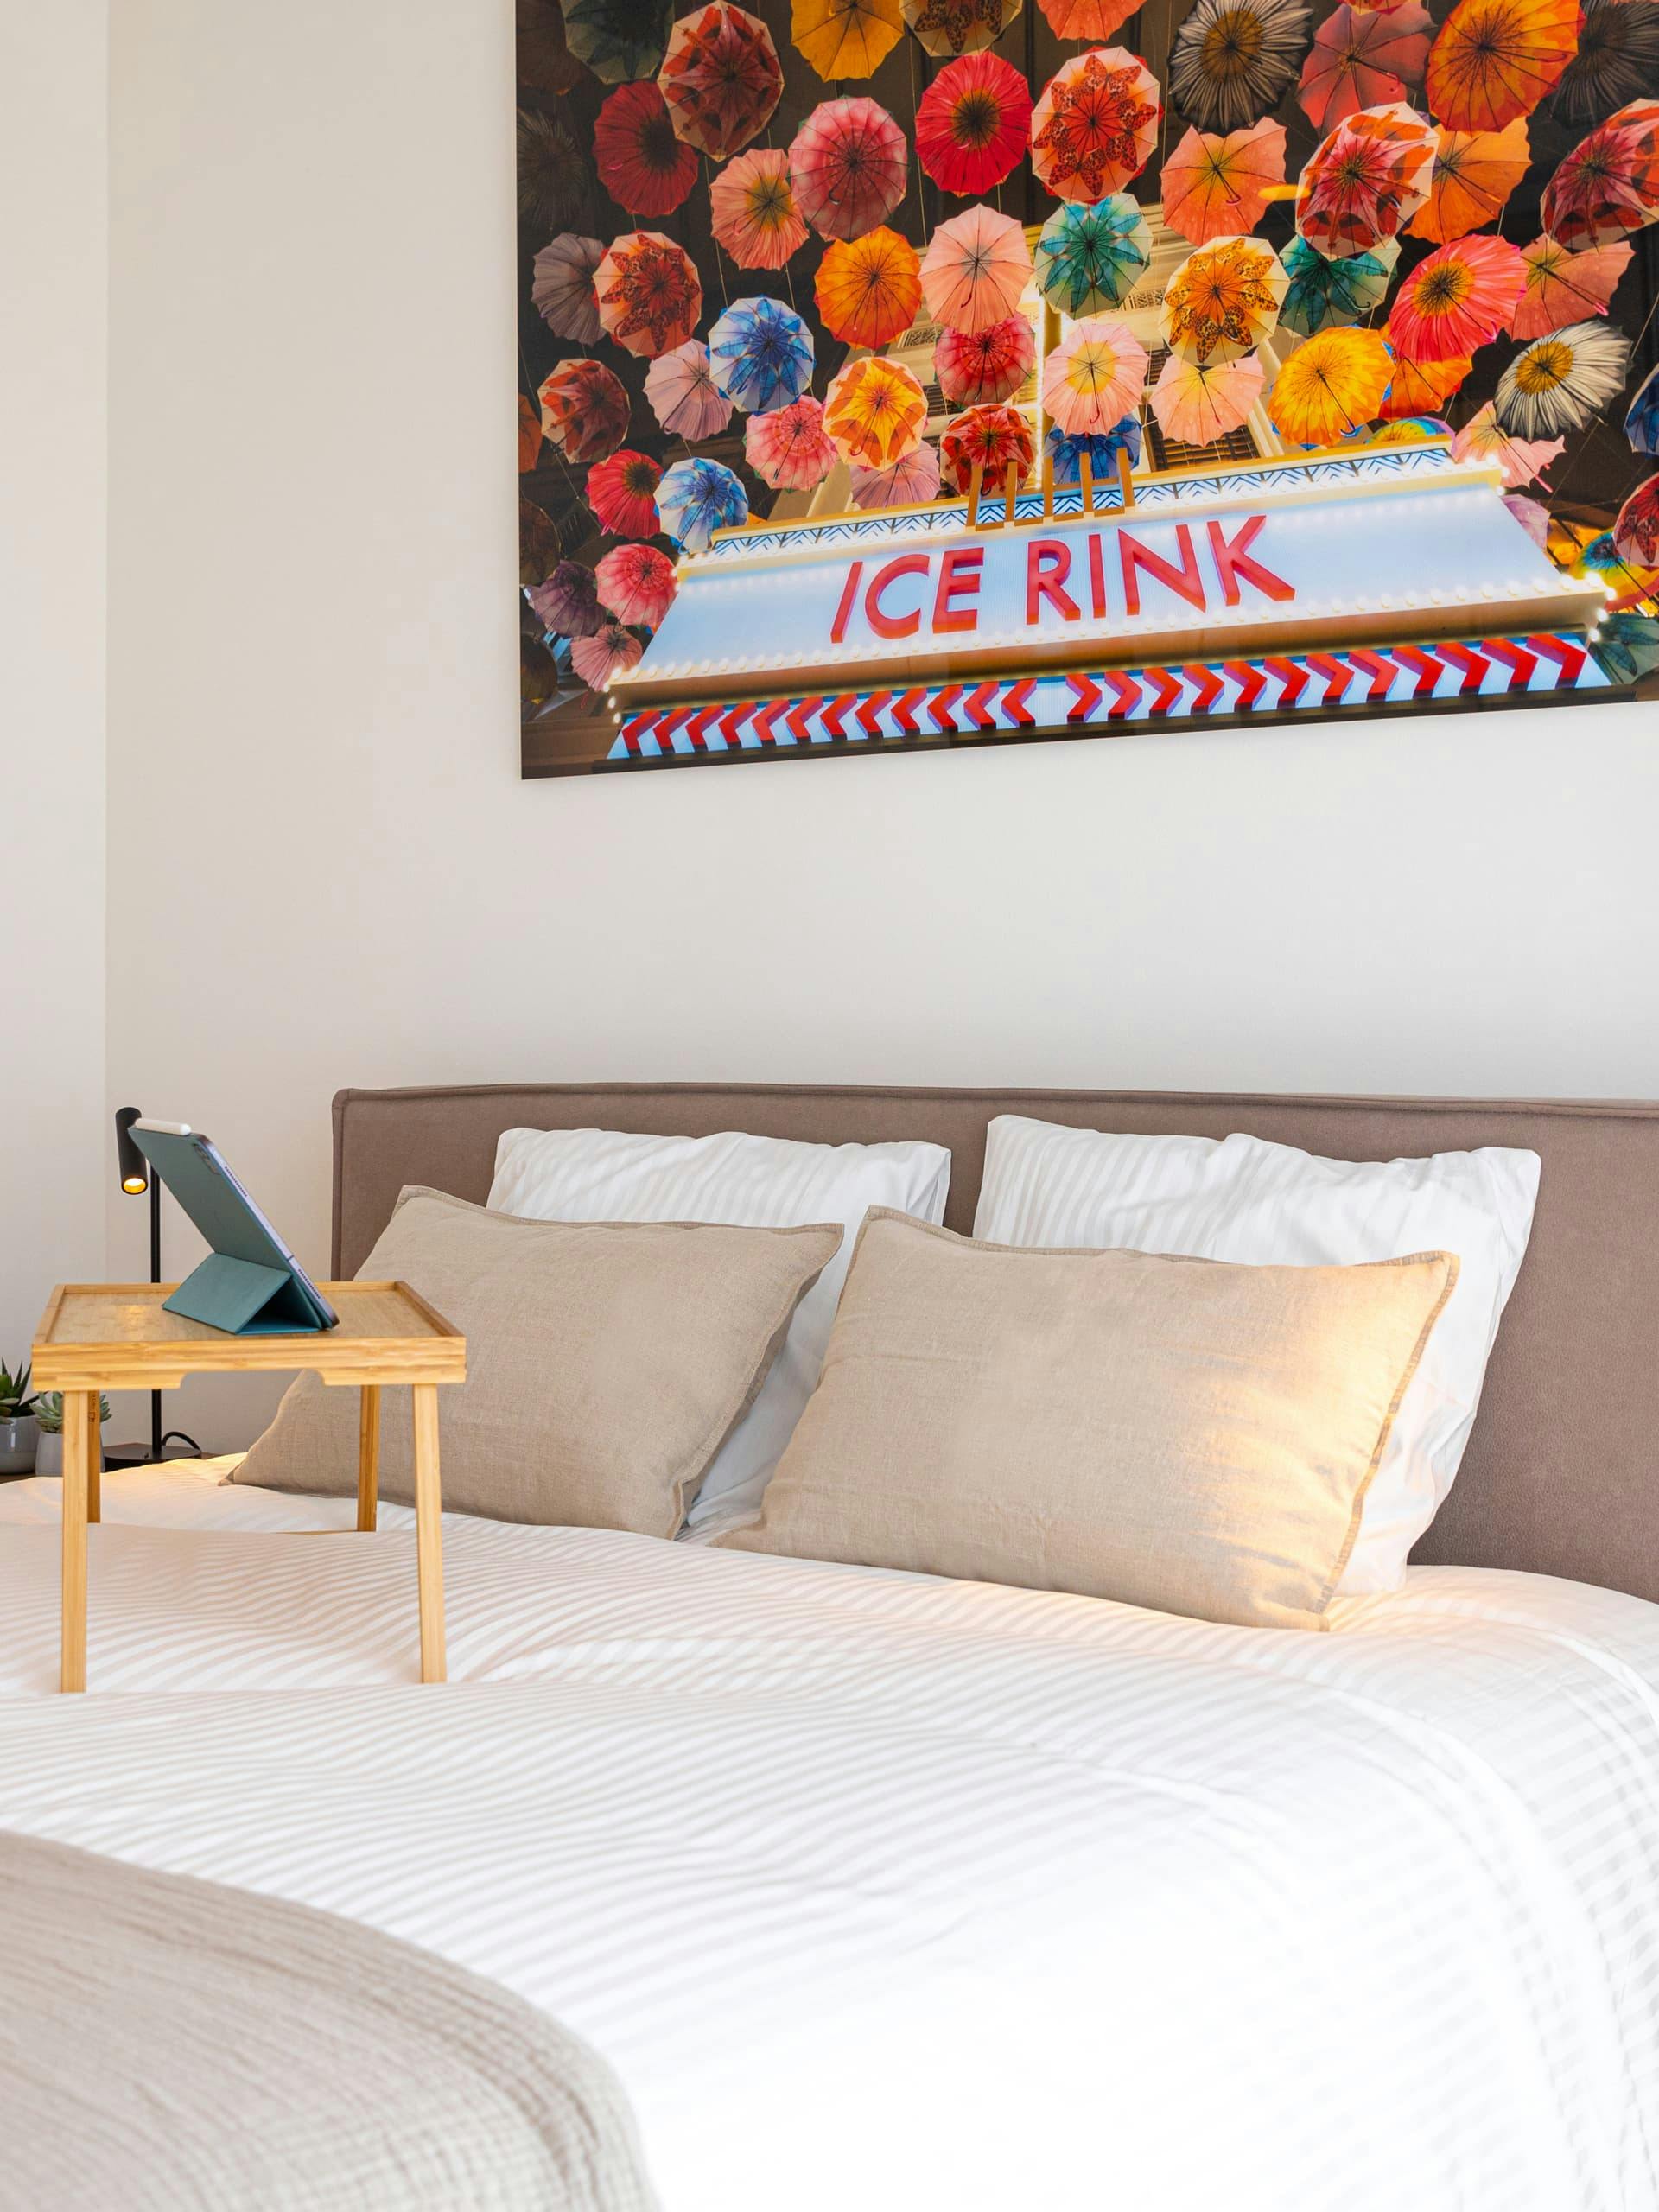 The picture illustrates the view of a bed with an iPad on a wooden-legged stand tray. Above the bed frame is a photograph of flowers and the words Ice Rink.
